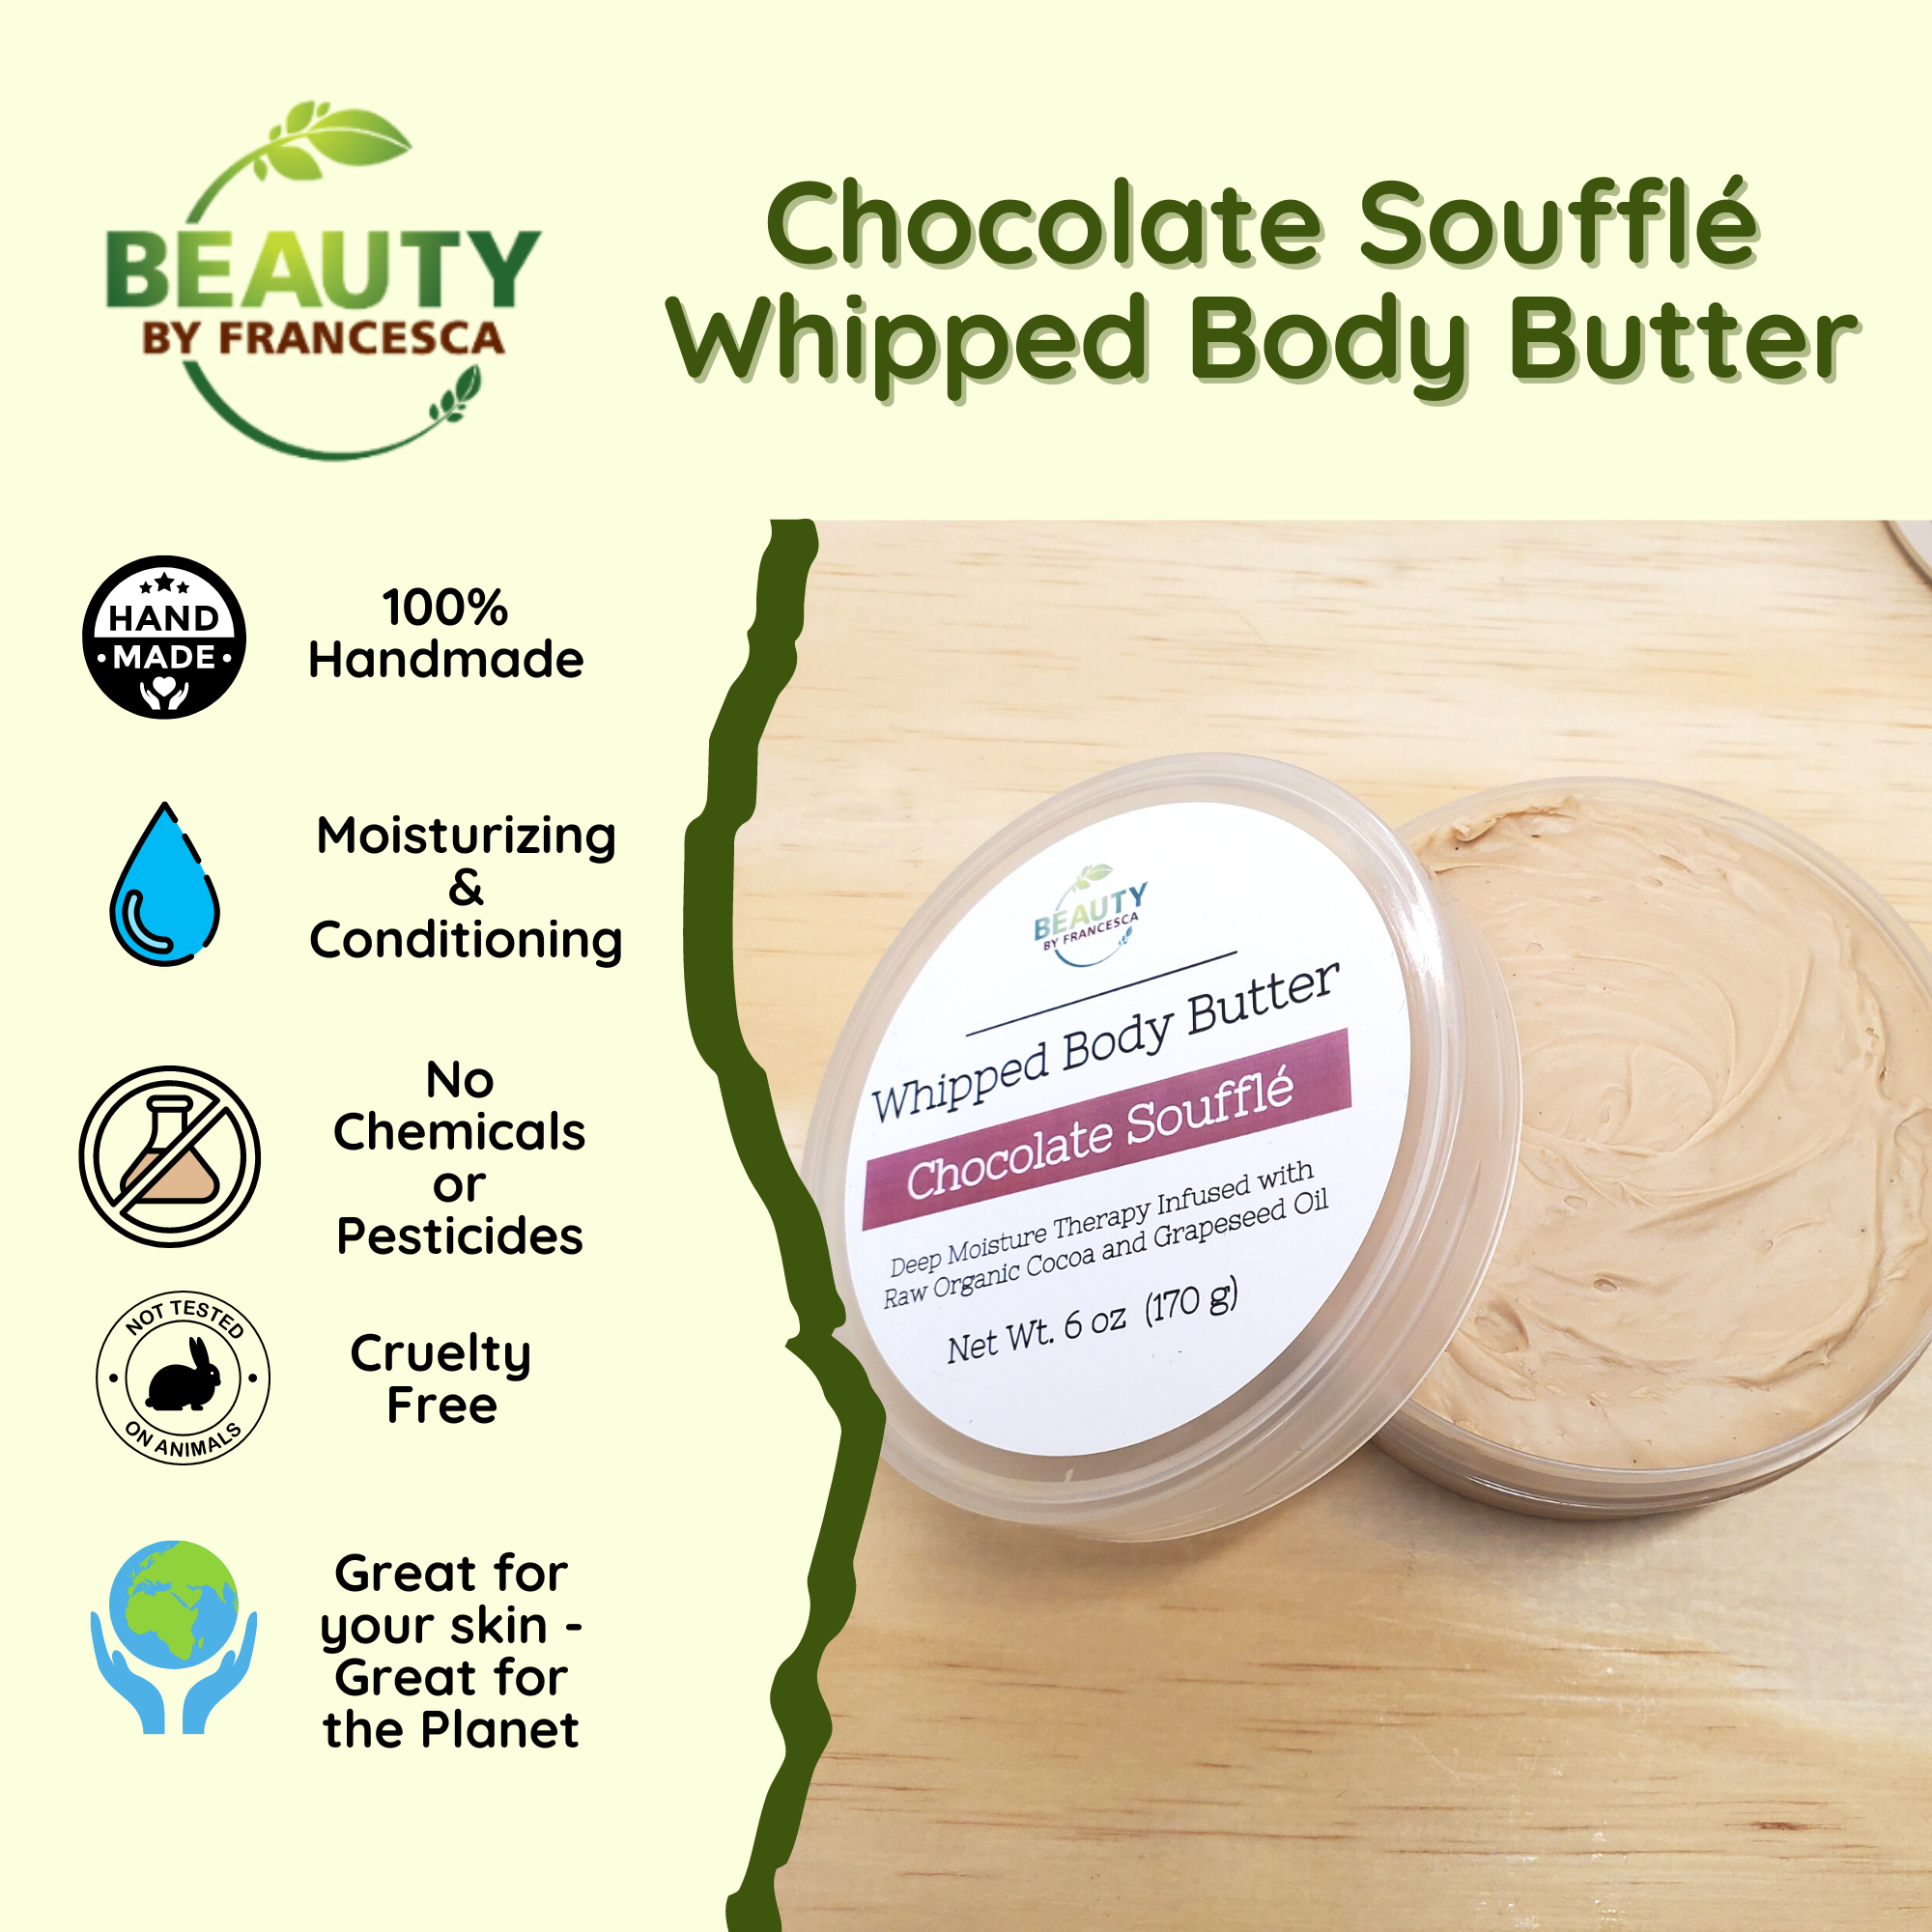 Chocolate Souffle - Whipped Chocolate Body Butter - 6 oz